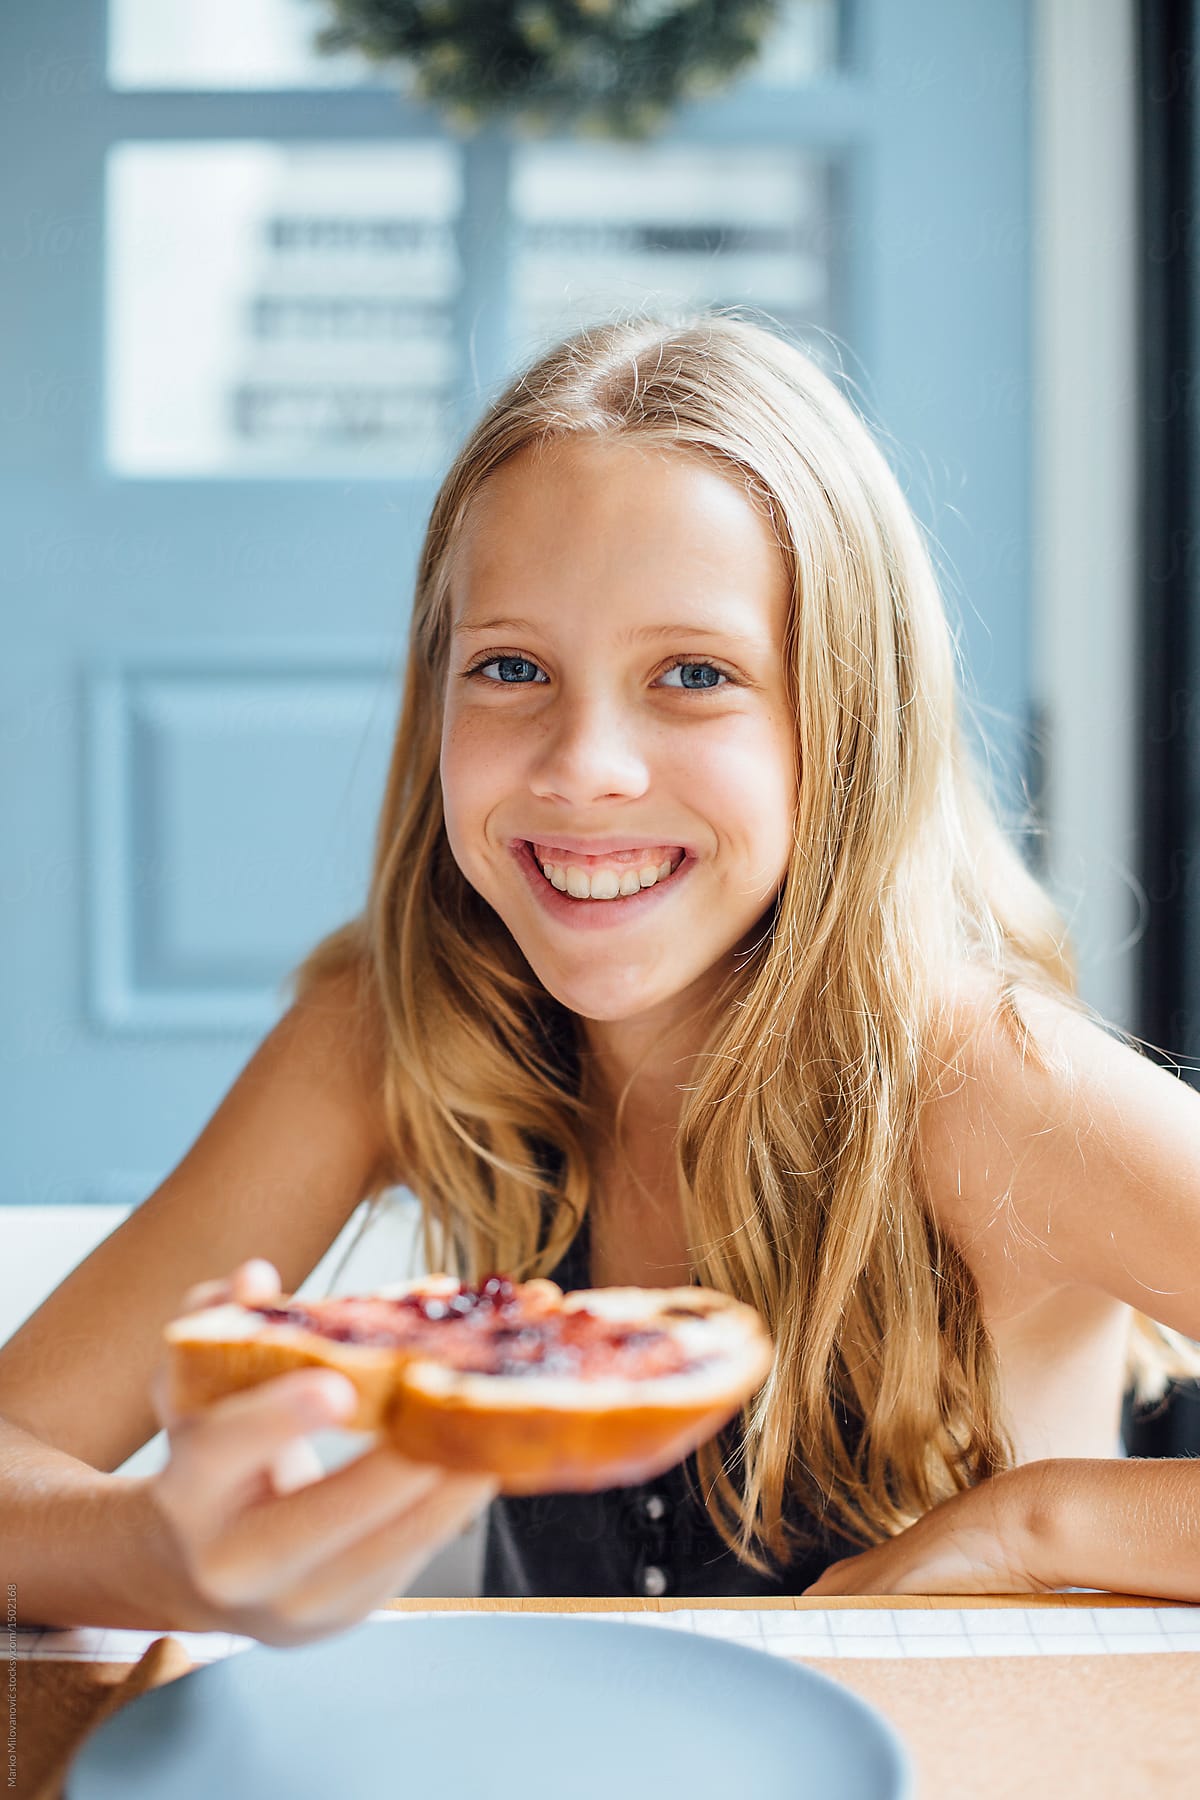 Young girl holding toast with jam